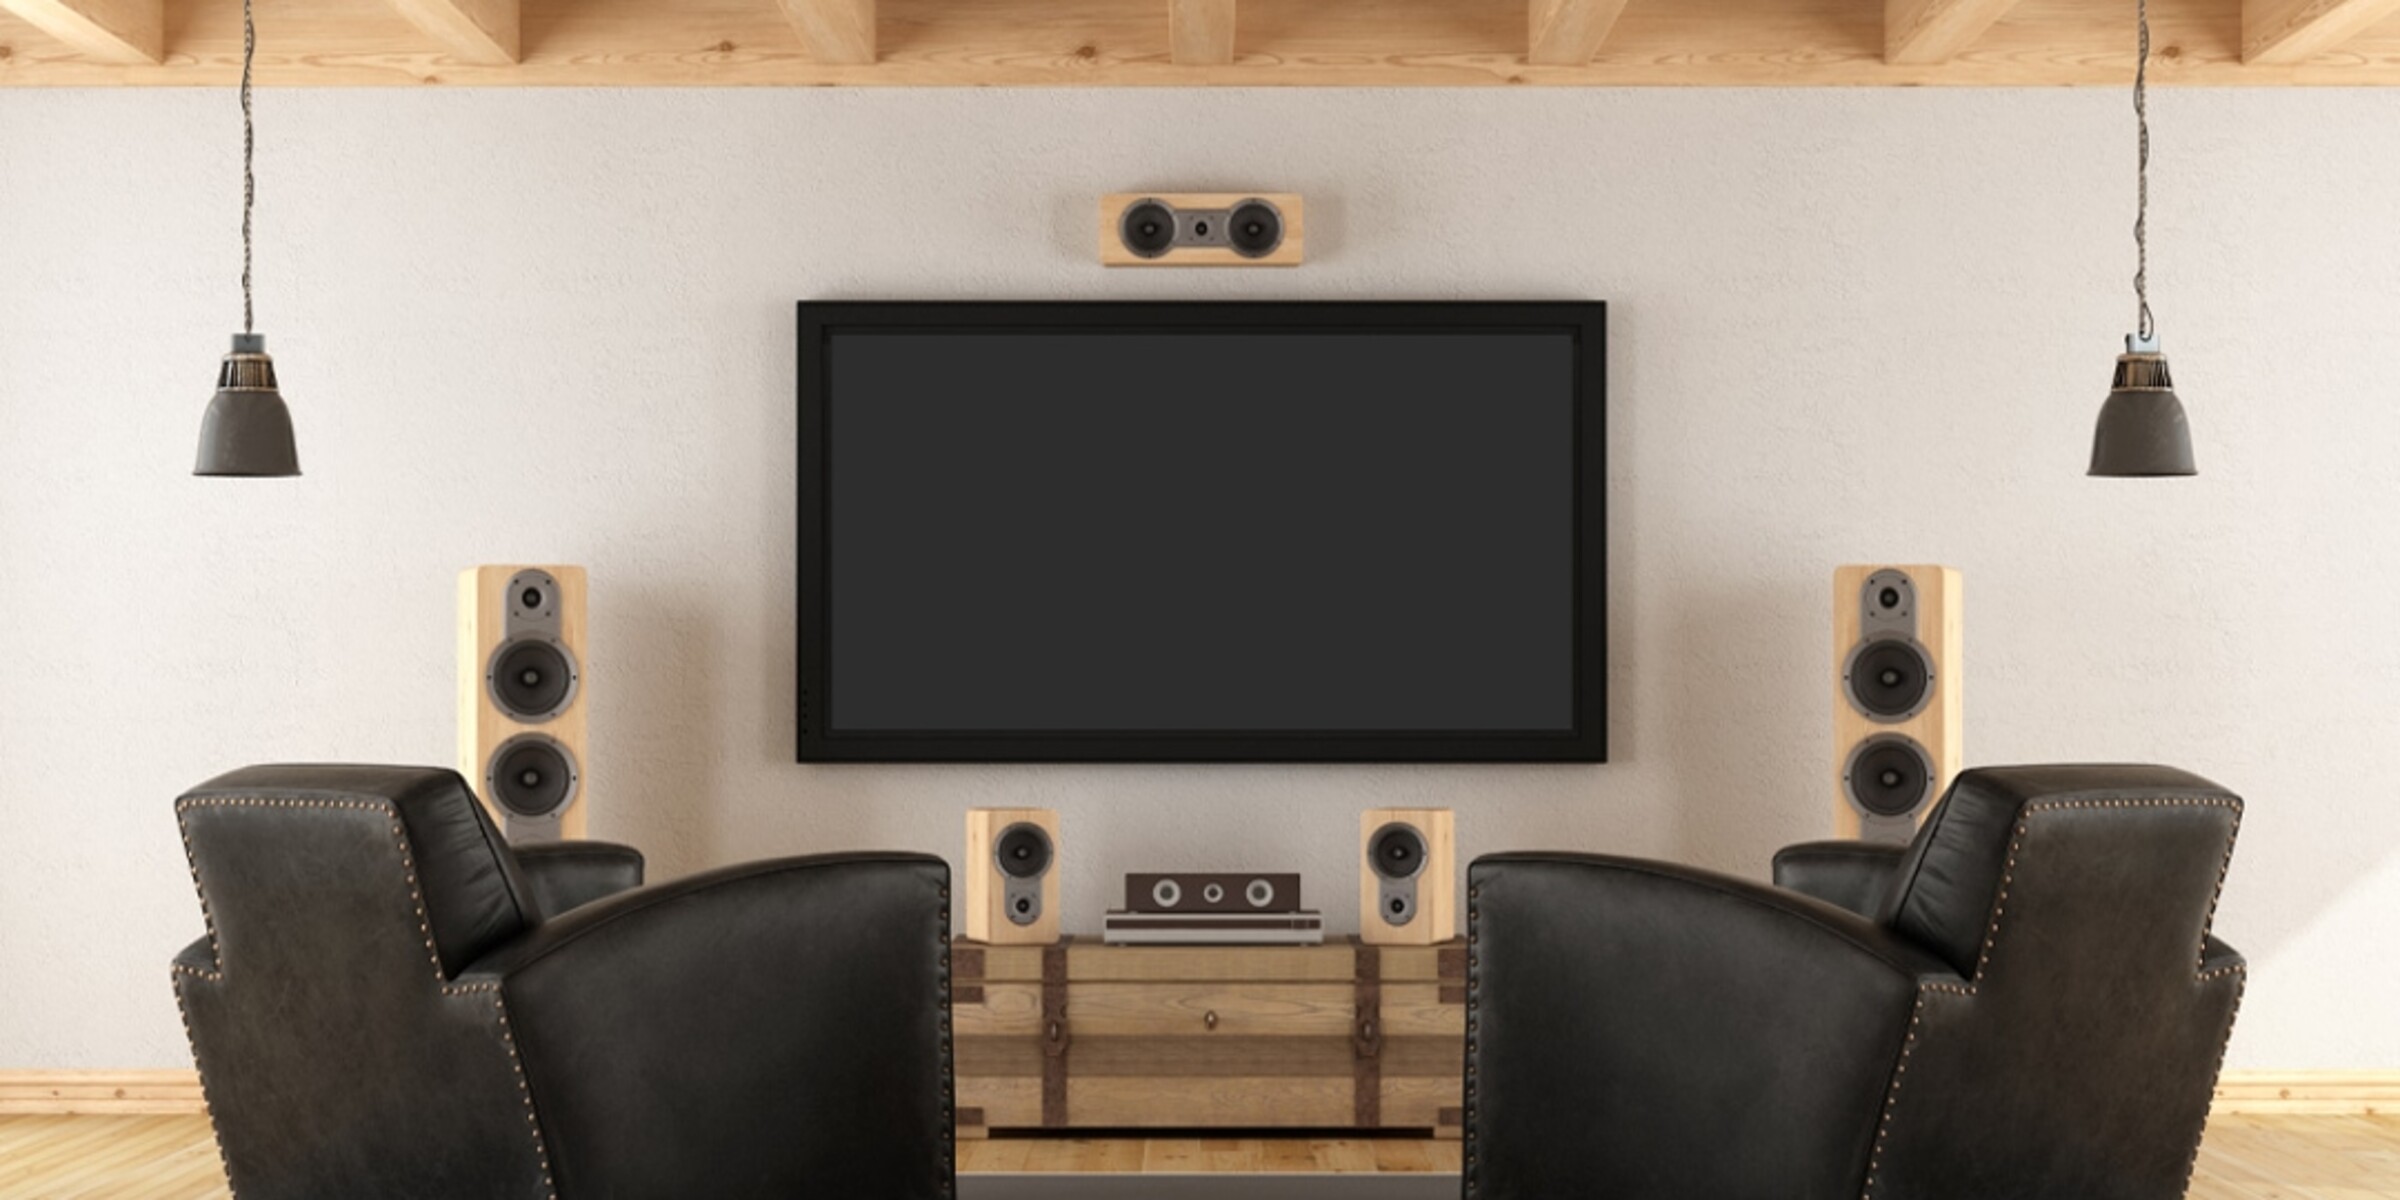 How To Install Surround Sound System If You Already Have Walls Installed